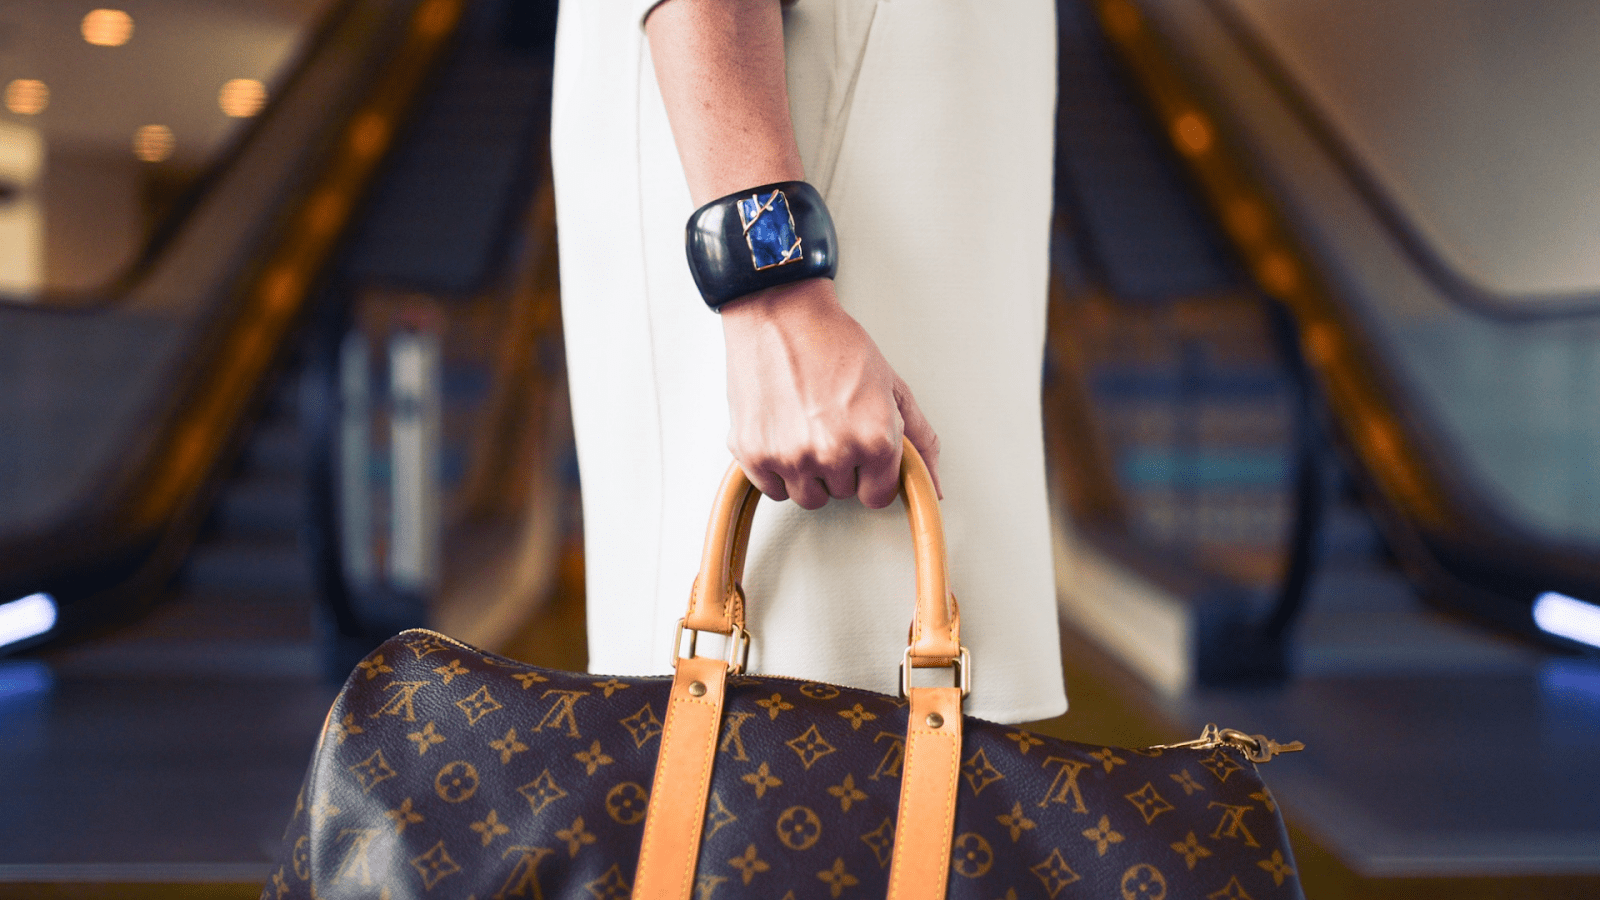 10 Tips to Take Care of Your Designer Handbags